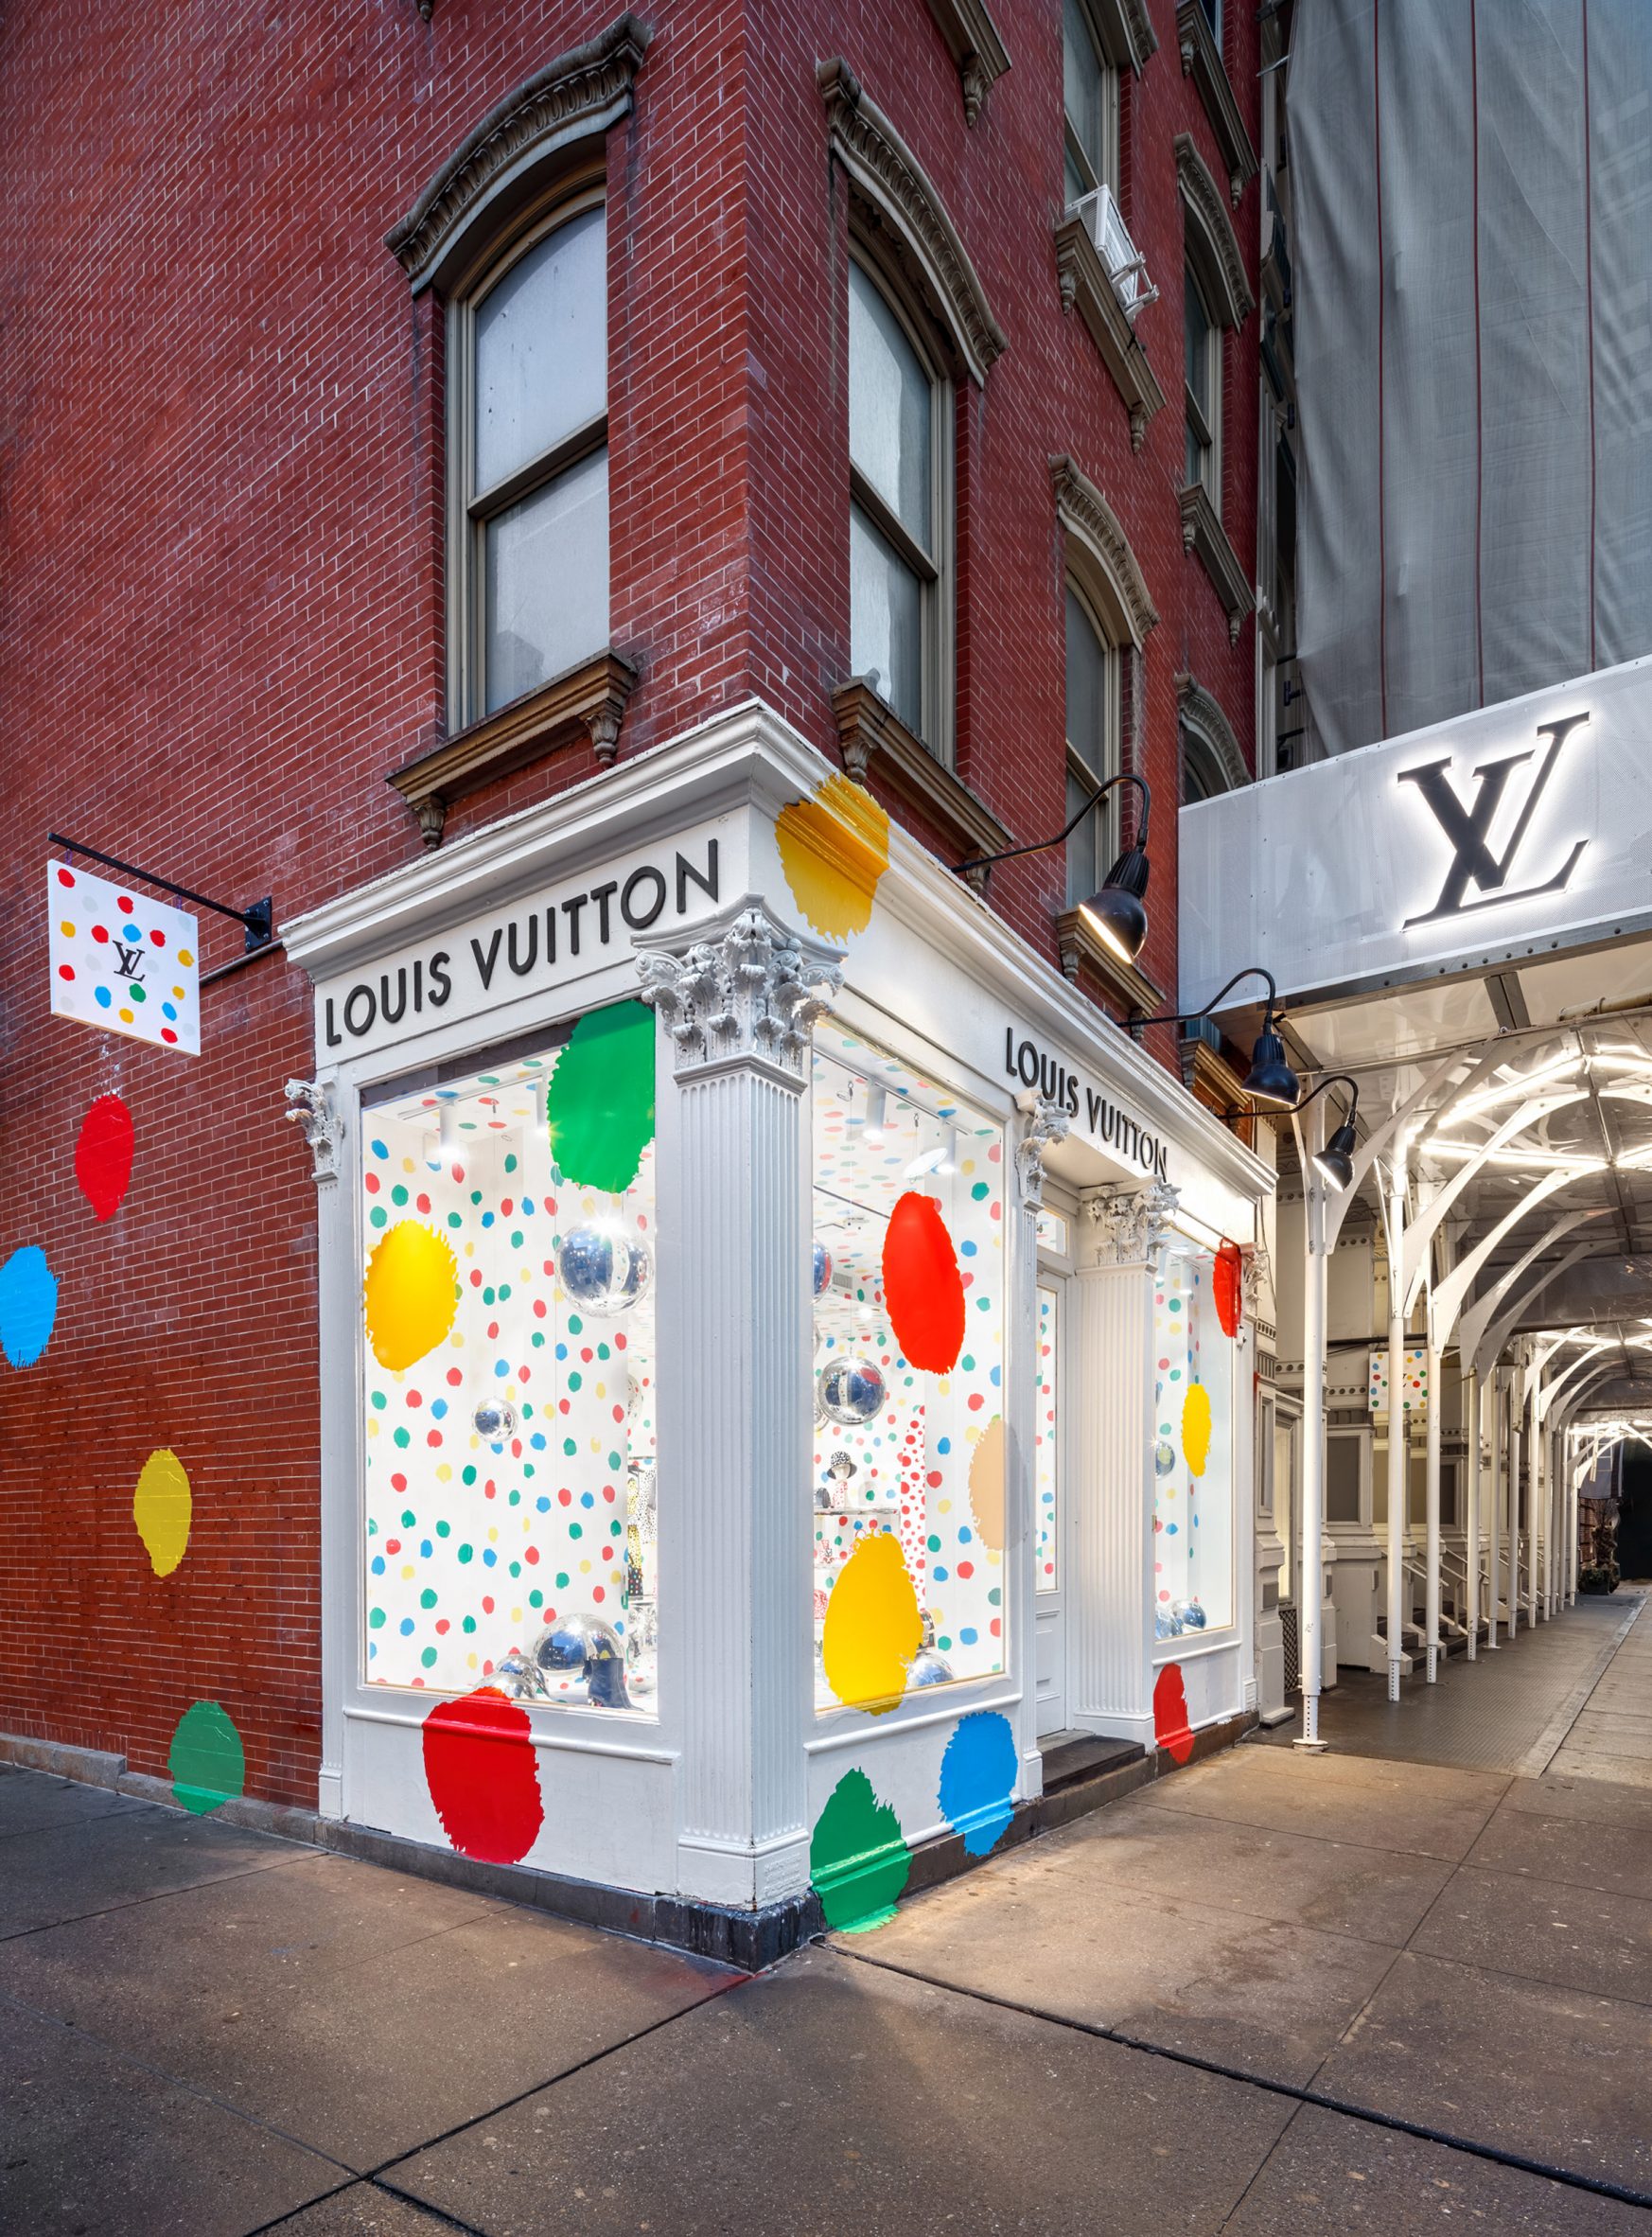 Exterior image of the pop up Louis Vuitton and Yayoi Kusama store